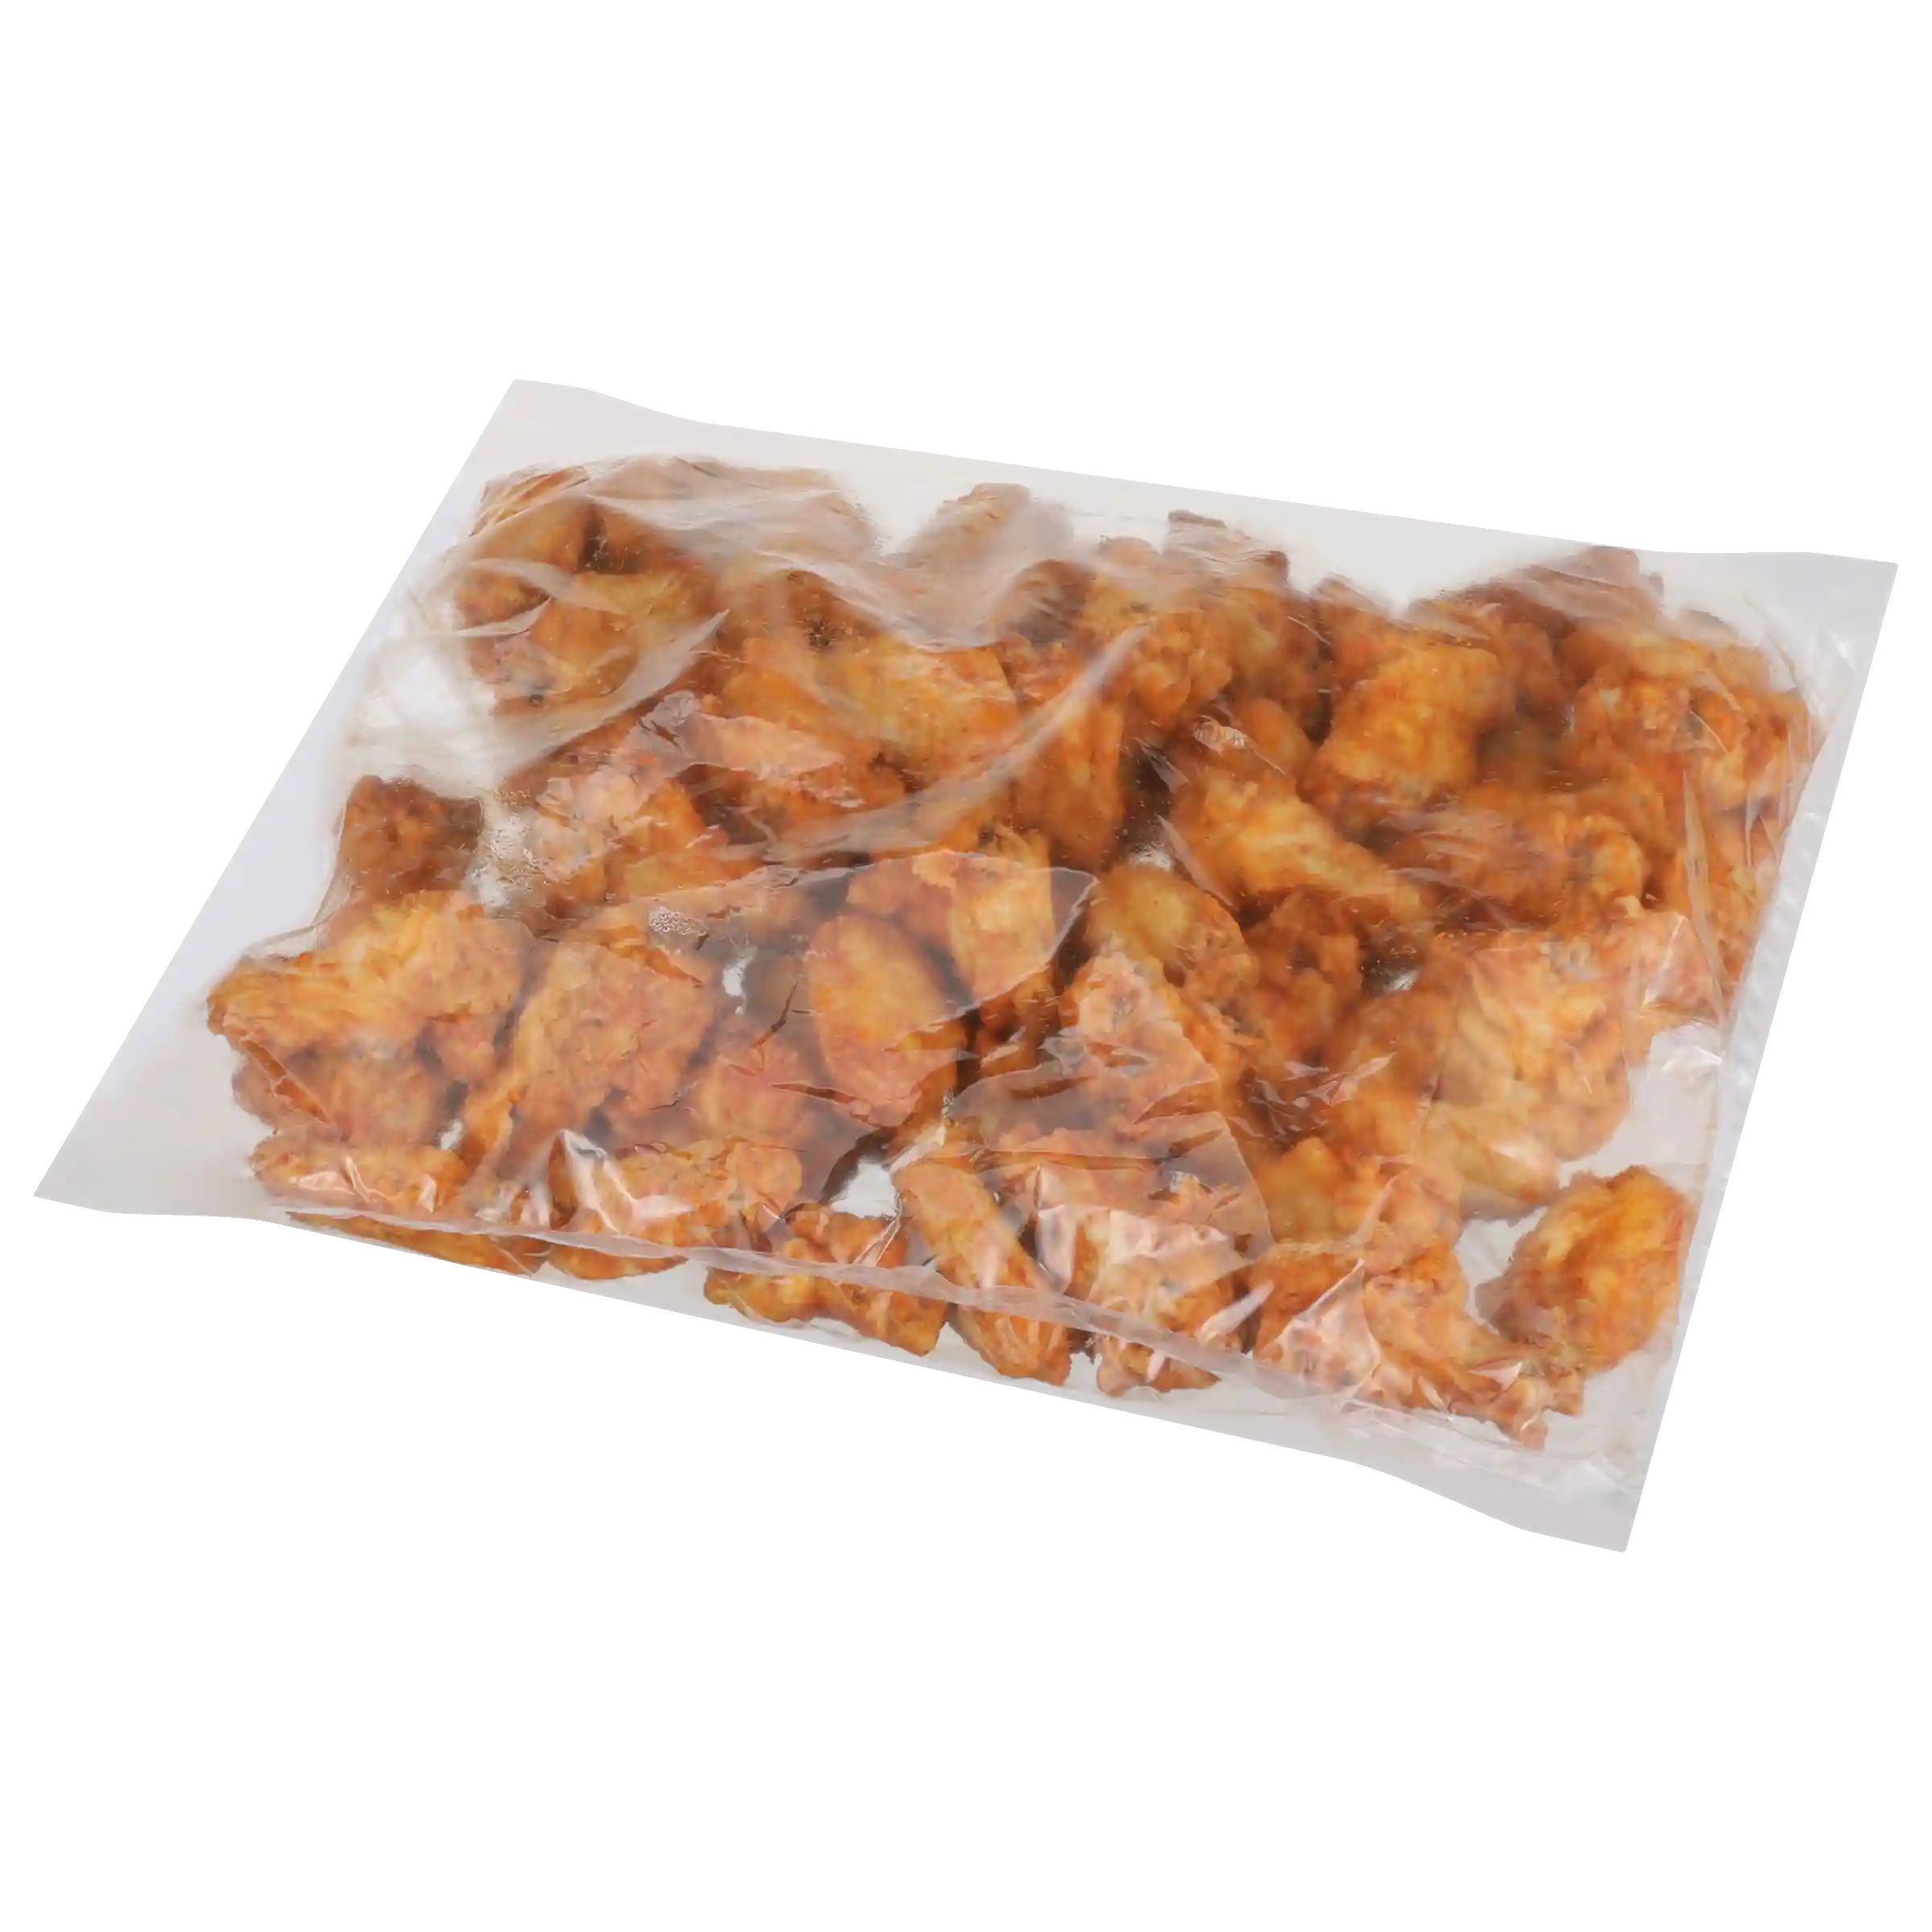 Tyson® Wings of Fire® Fully Cooked Glazed Bone-In Chicken Wing Sections, Small_image_21